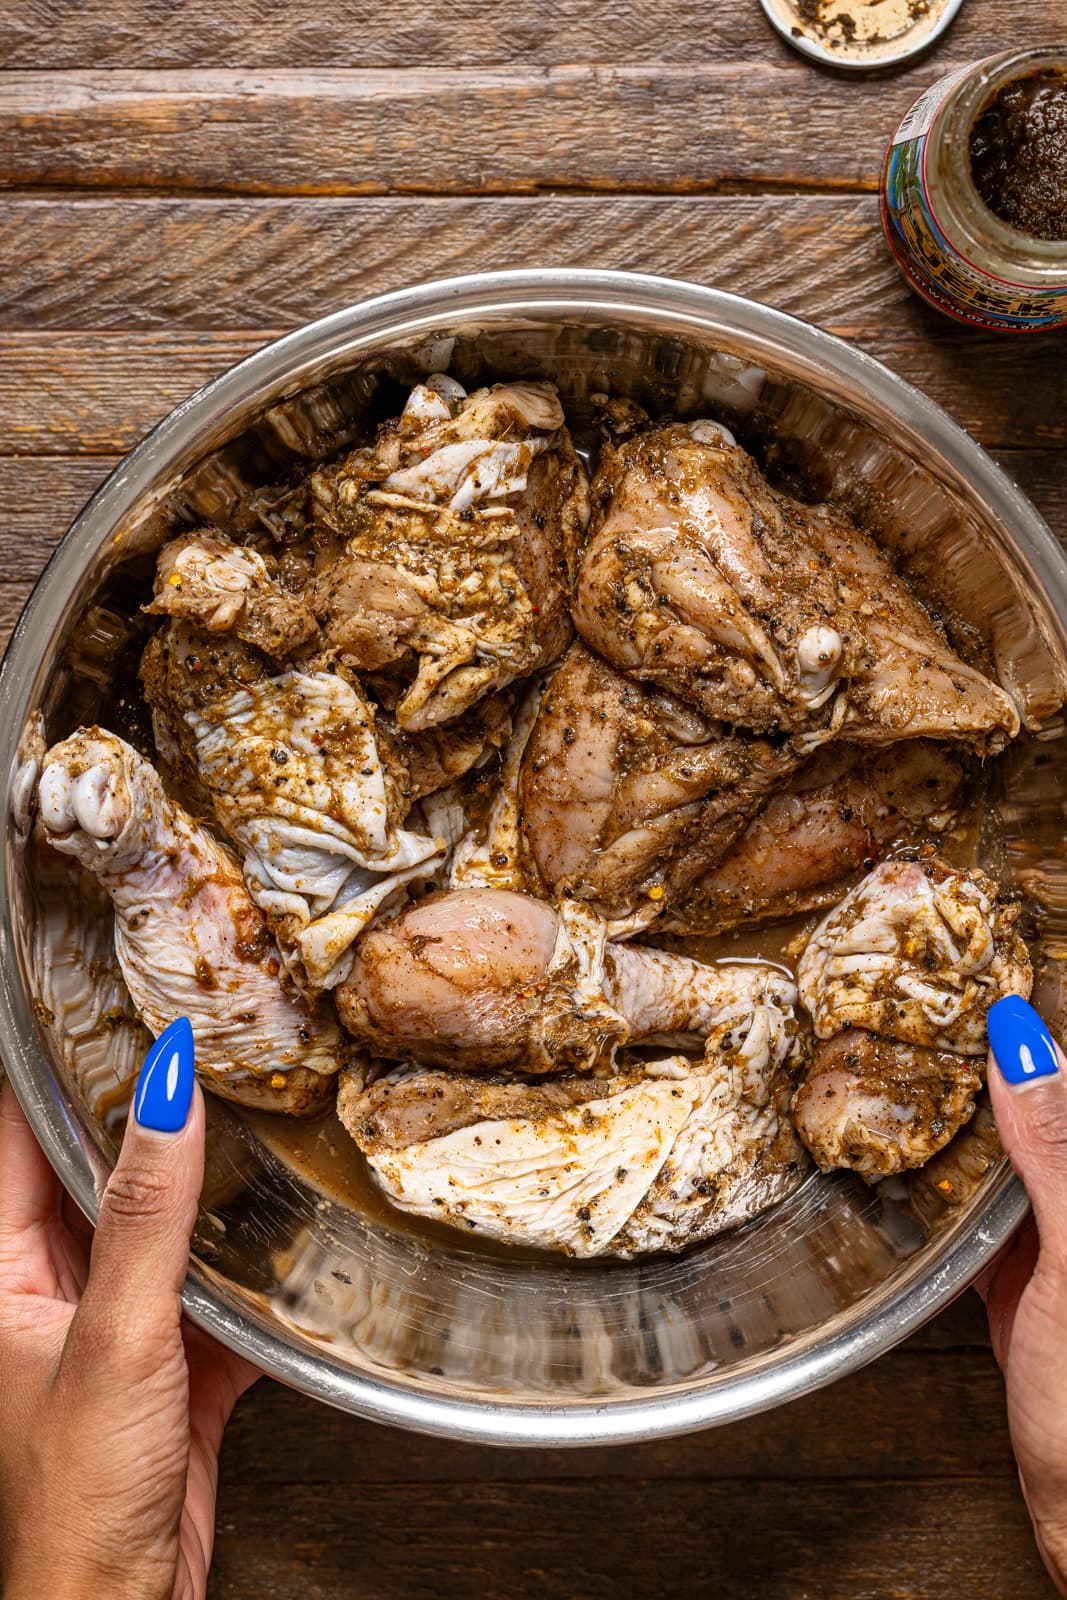 Marinated chicken in a silver bowl being held.